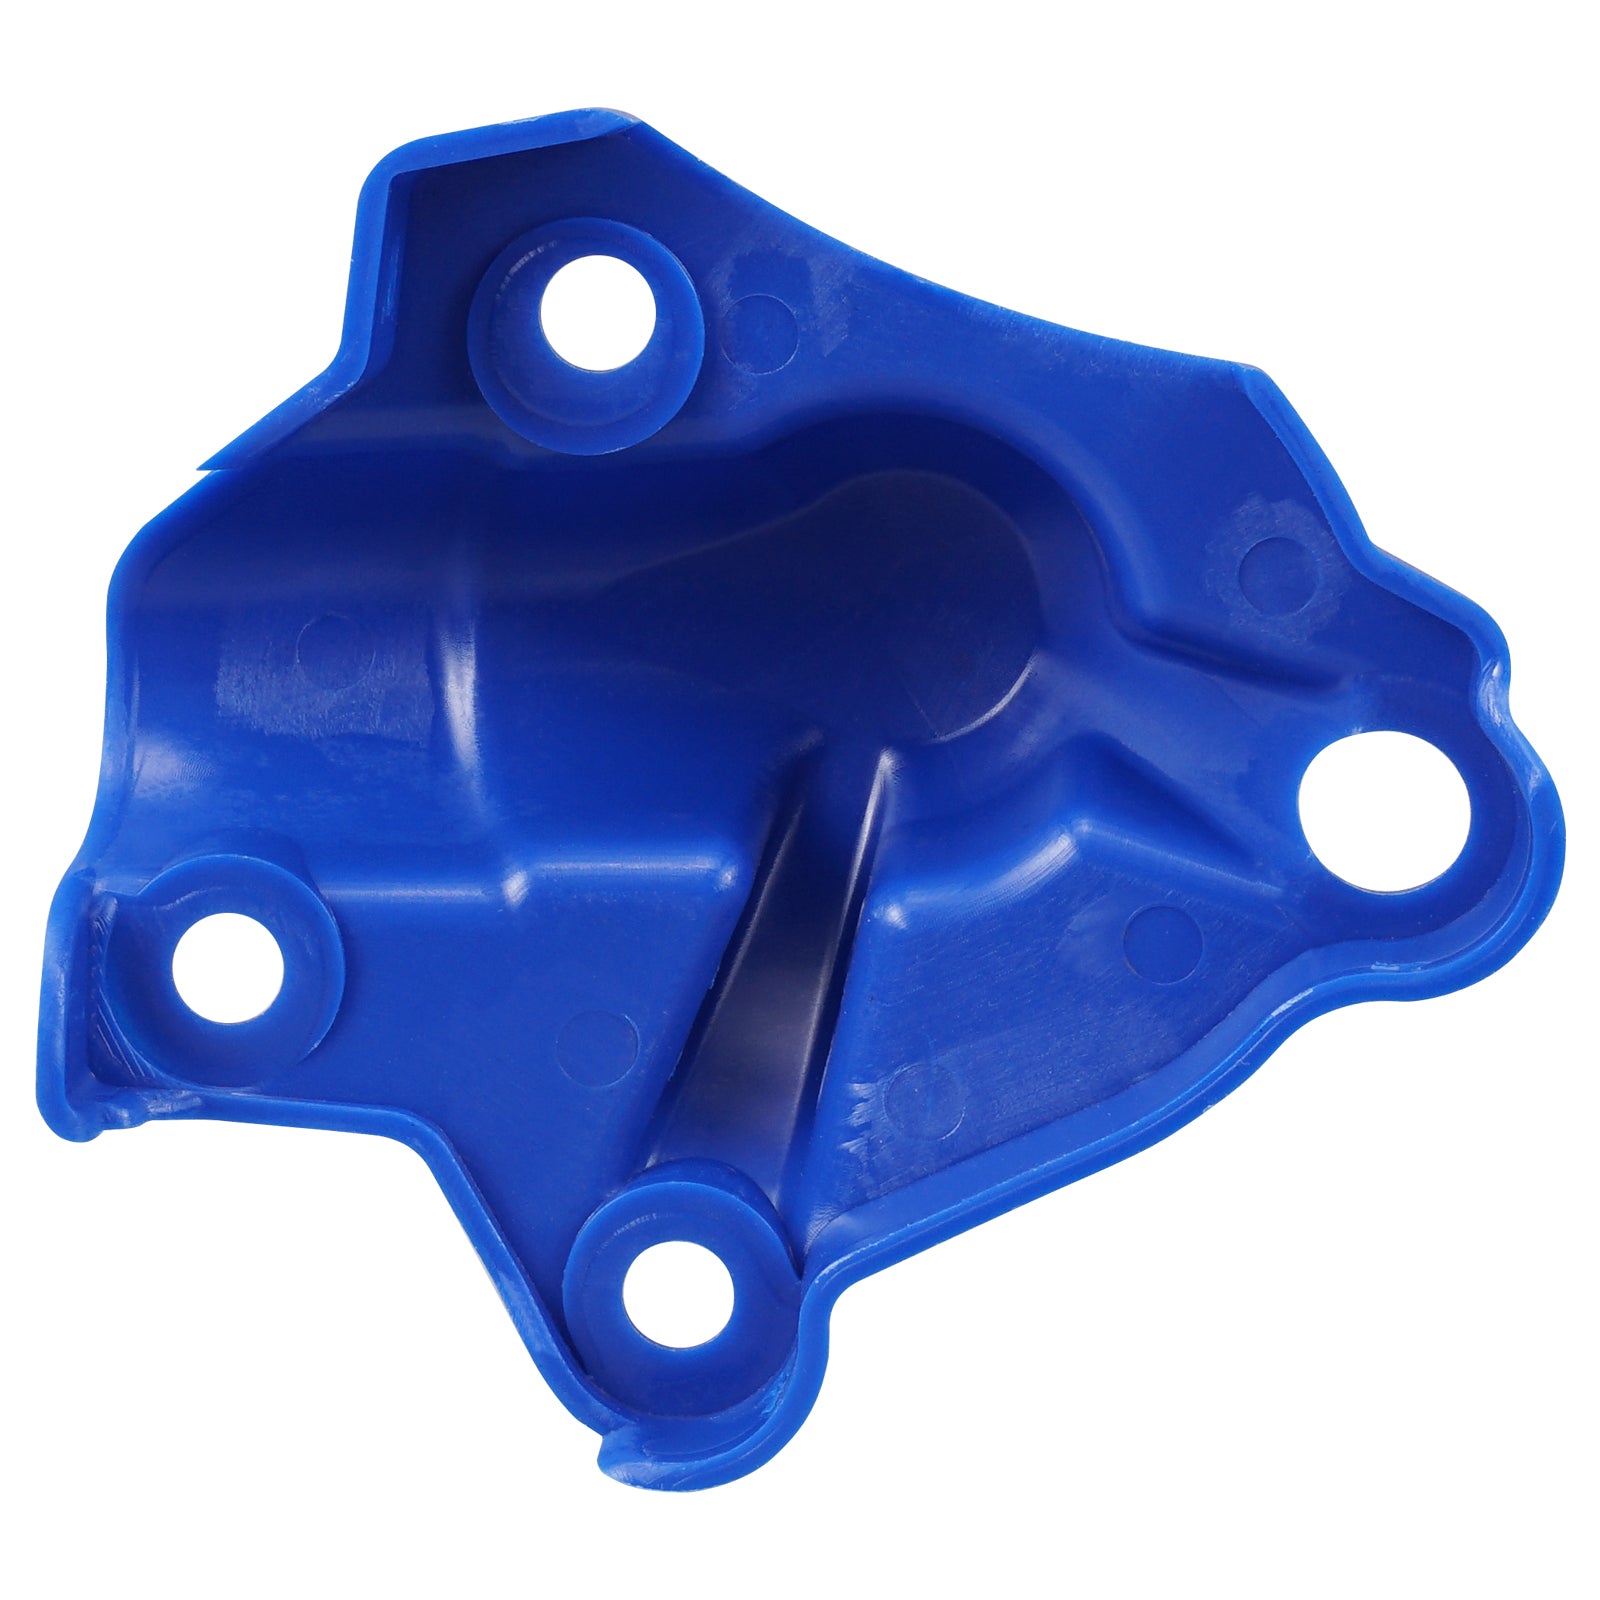 Water Pump Cover Protector For Husqvarna FC250 FC350 FE250